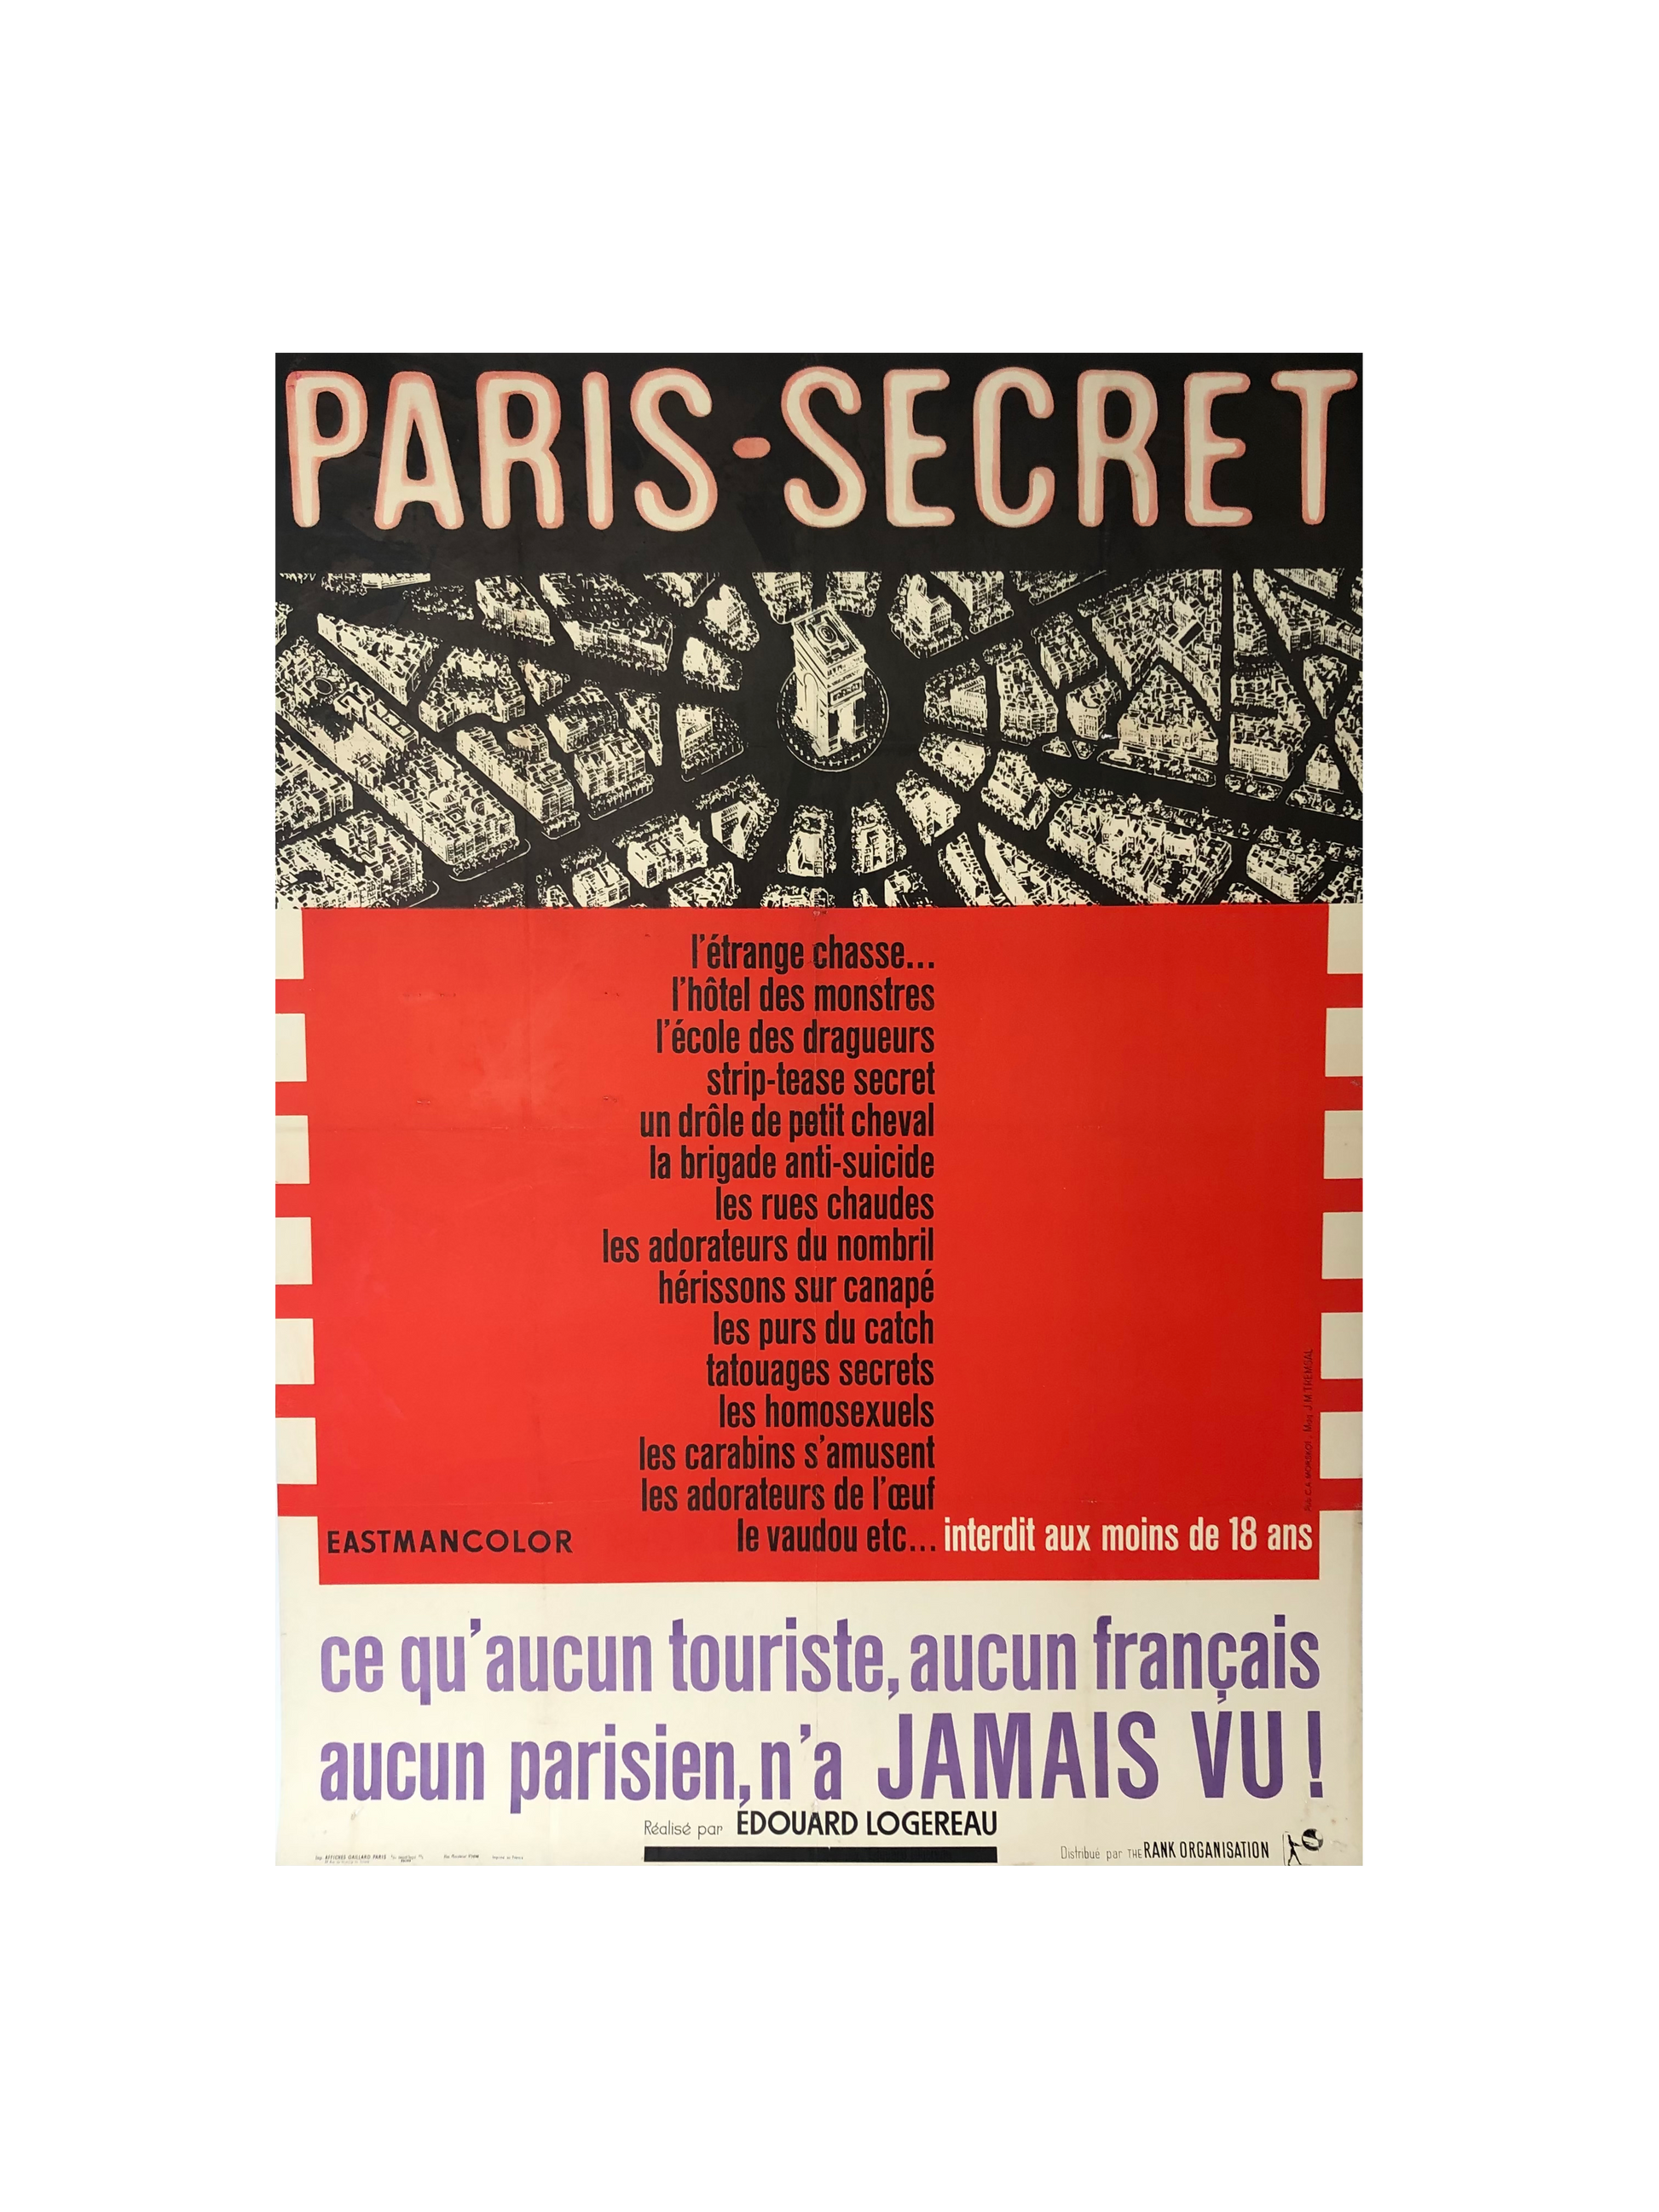 Le Secret Movie Posters From Movie Poster Shop